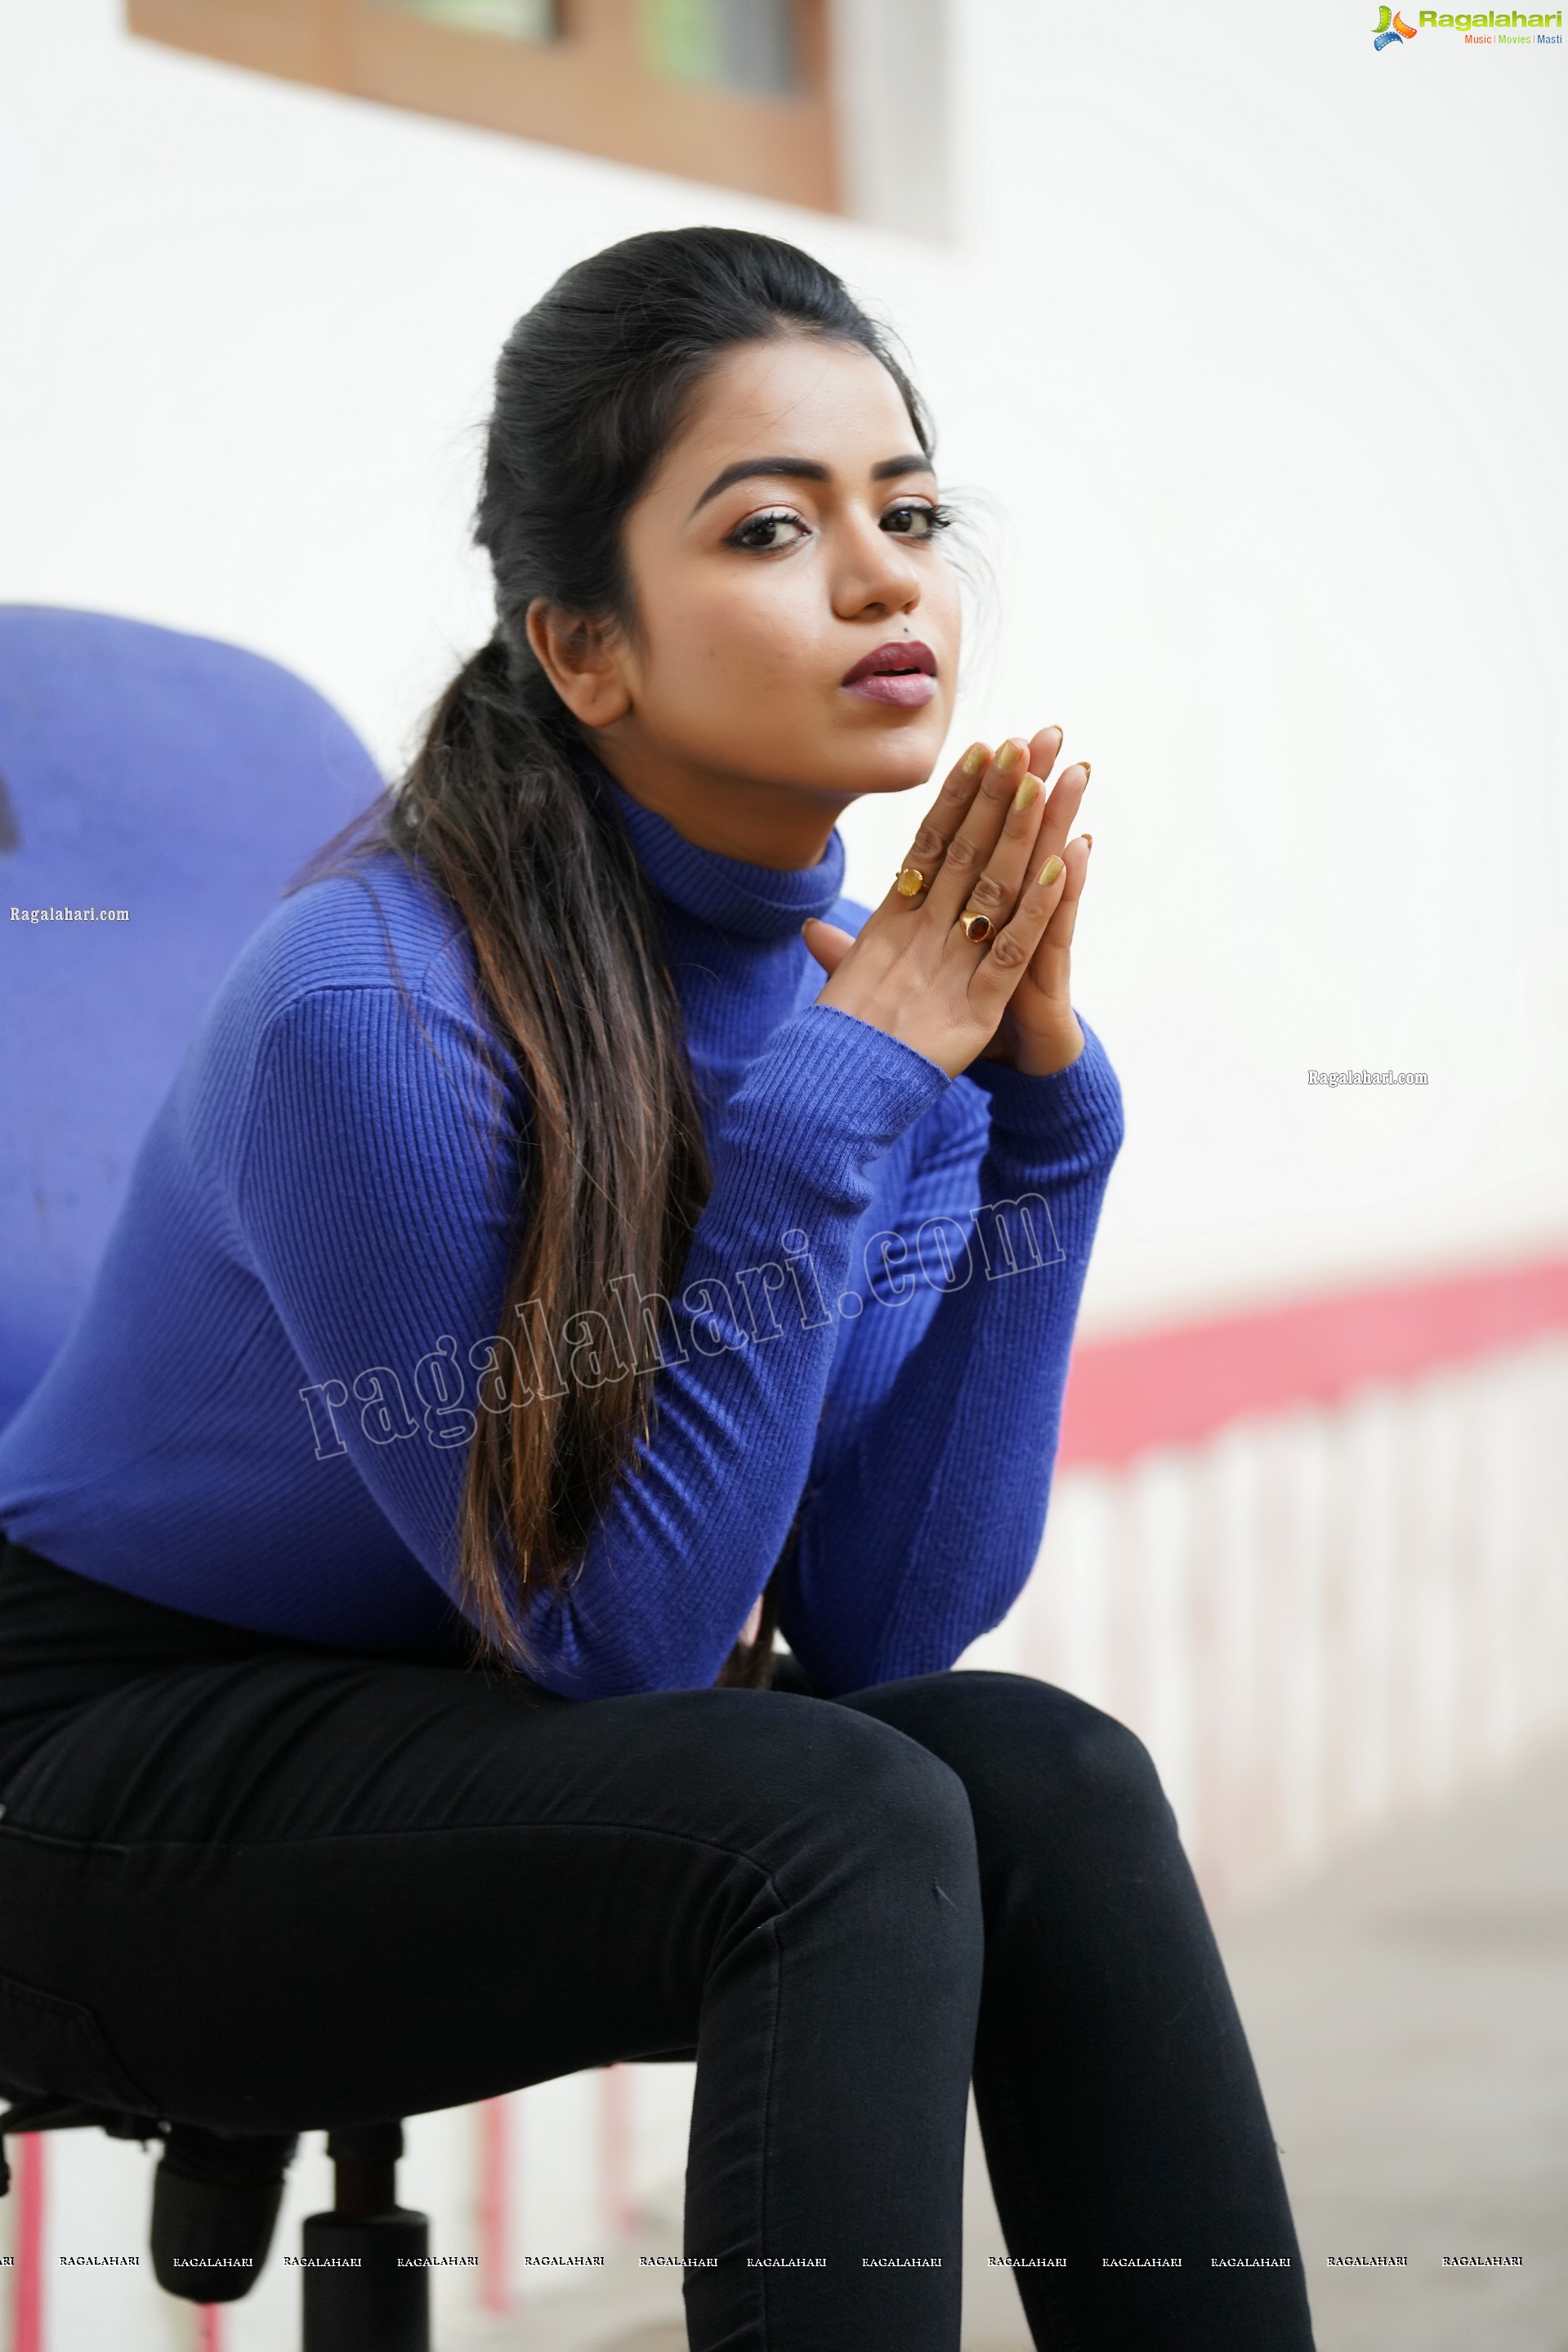 Bhavya Sri in Royal Blue Ribbed-Knit Turtleneck Top and Black Jeans, Exclusive Photoshoot